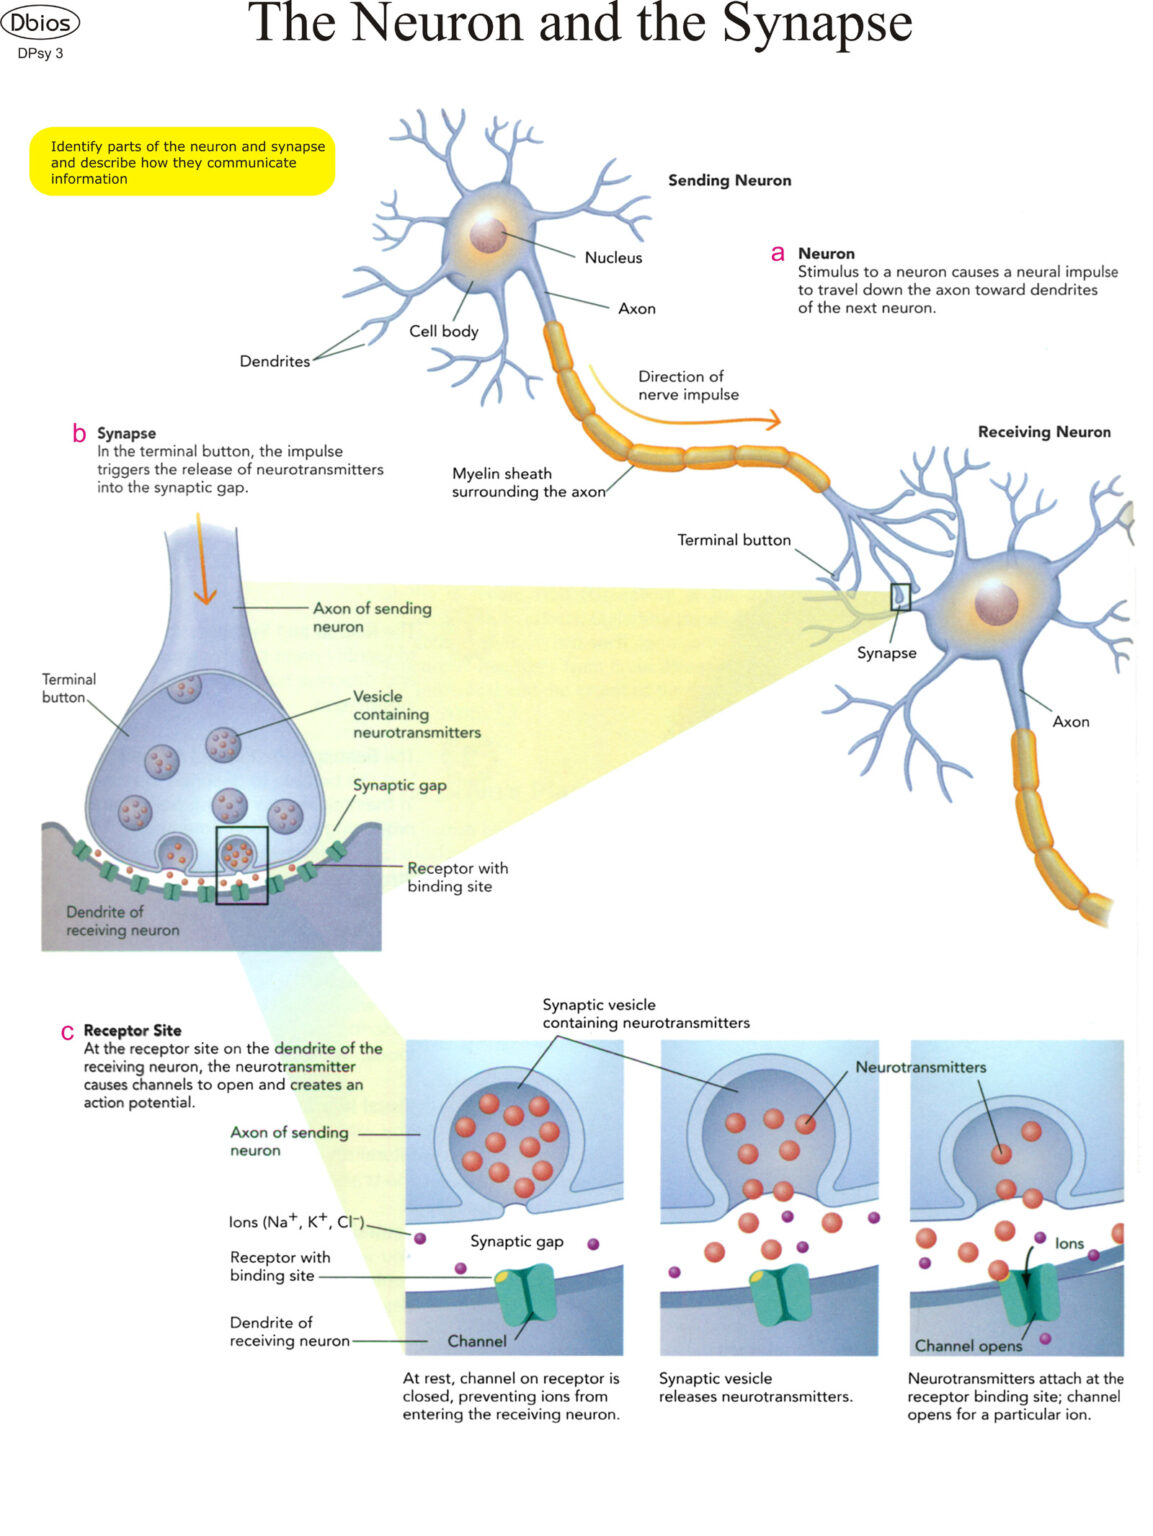 DPsy 3 The Neuron and the Synapse | Dbios Charts